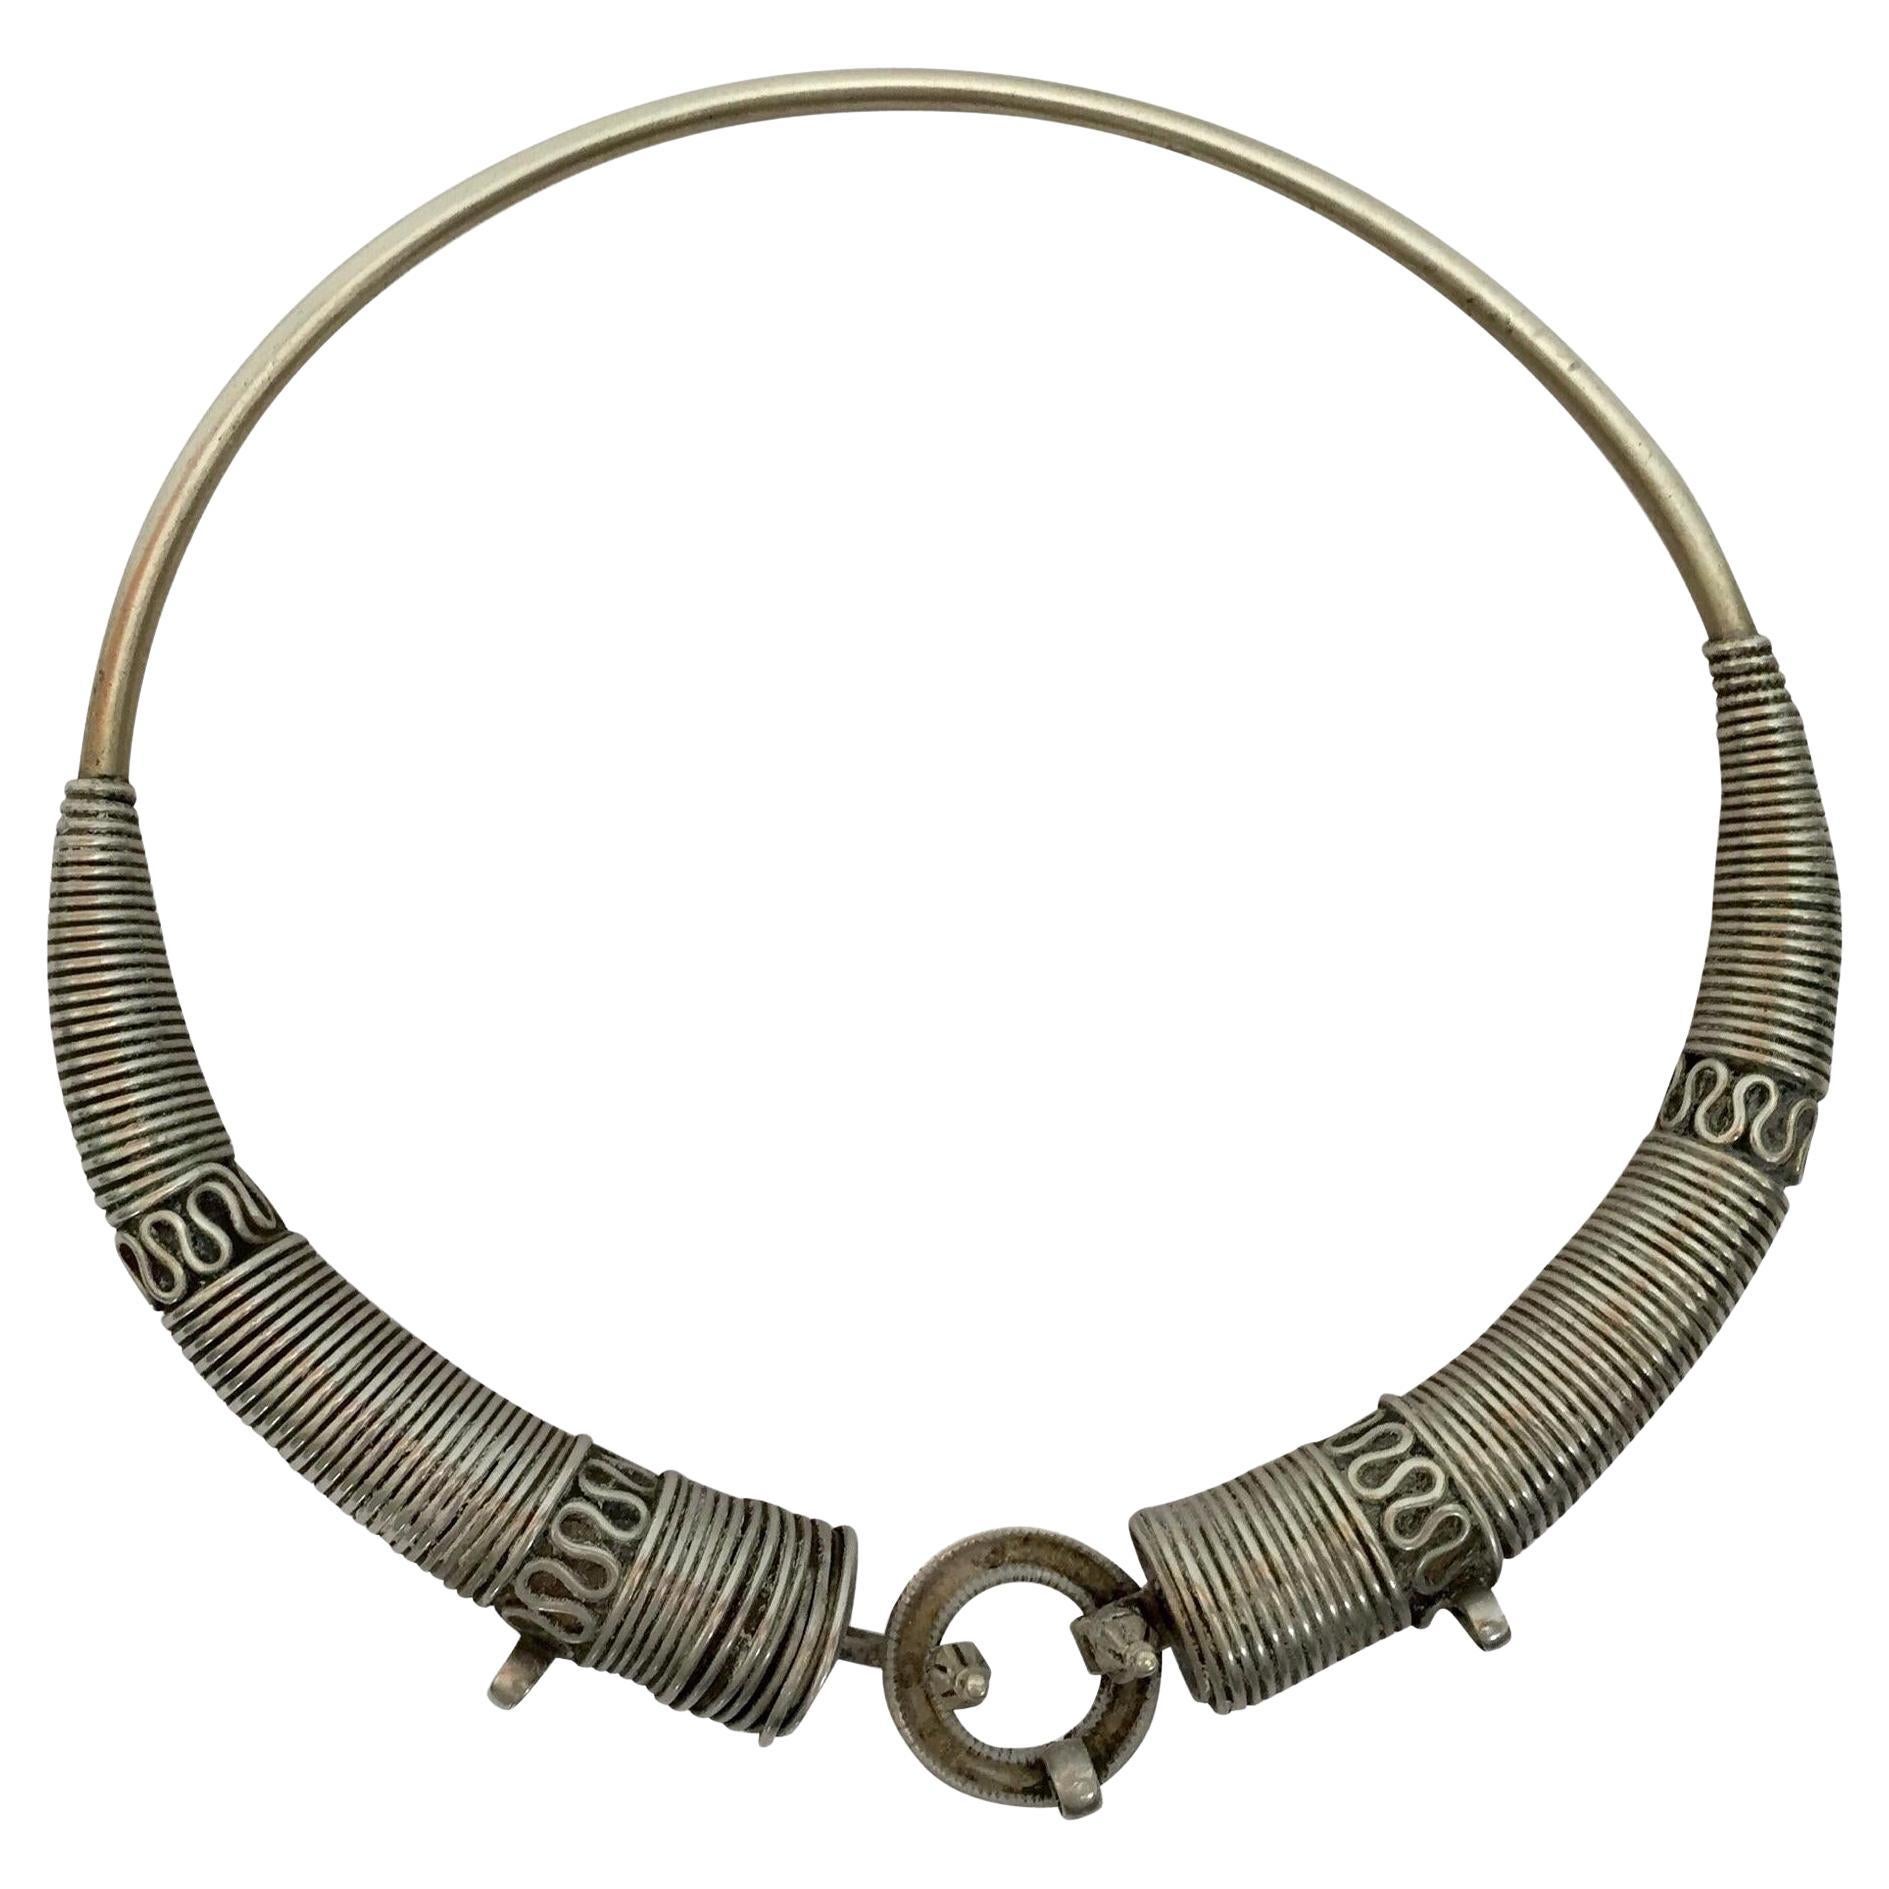 Traditional Silver Torque Necklace Chocker from Rajasthan India